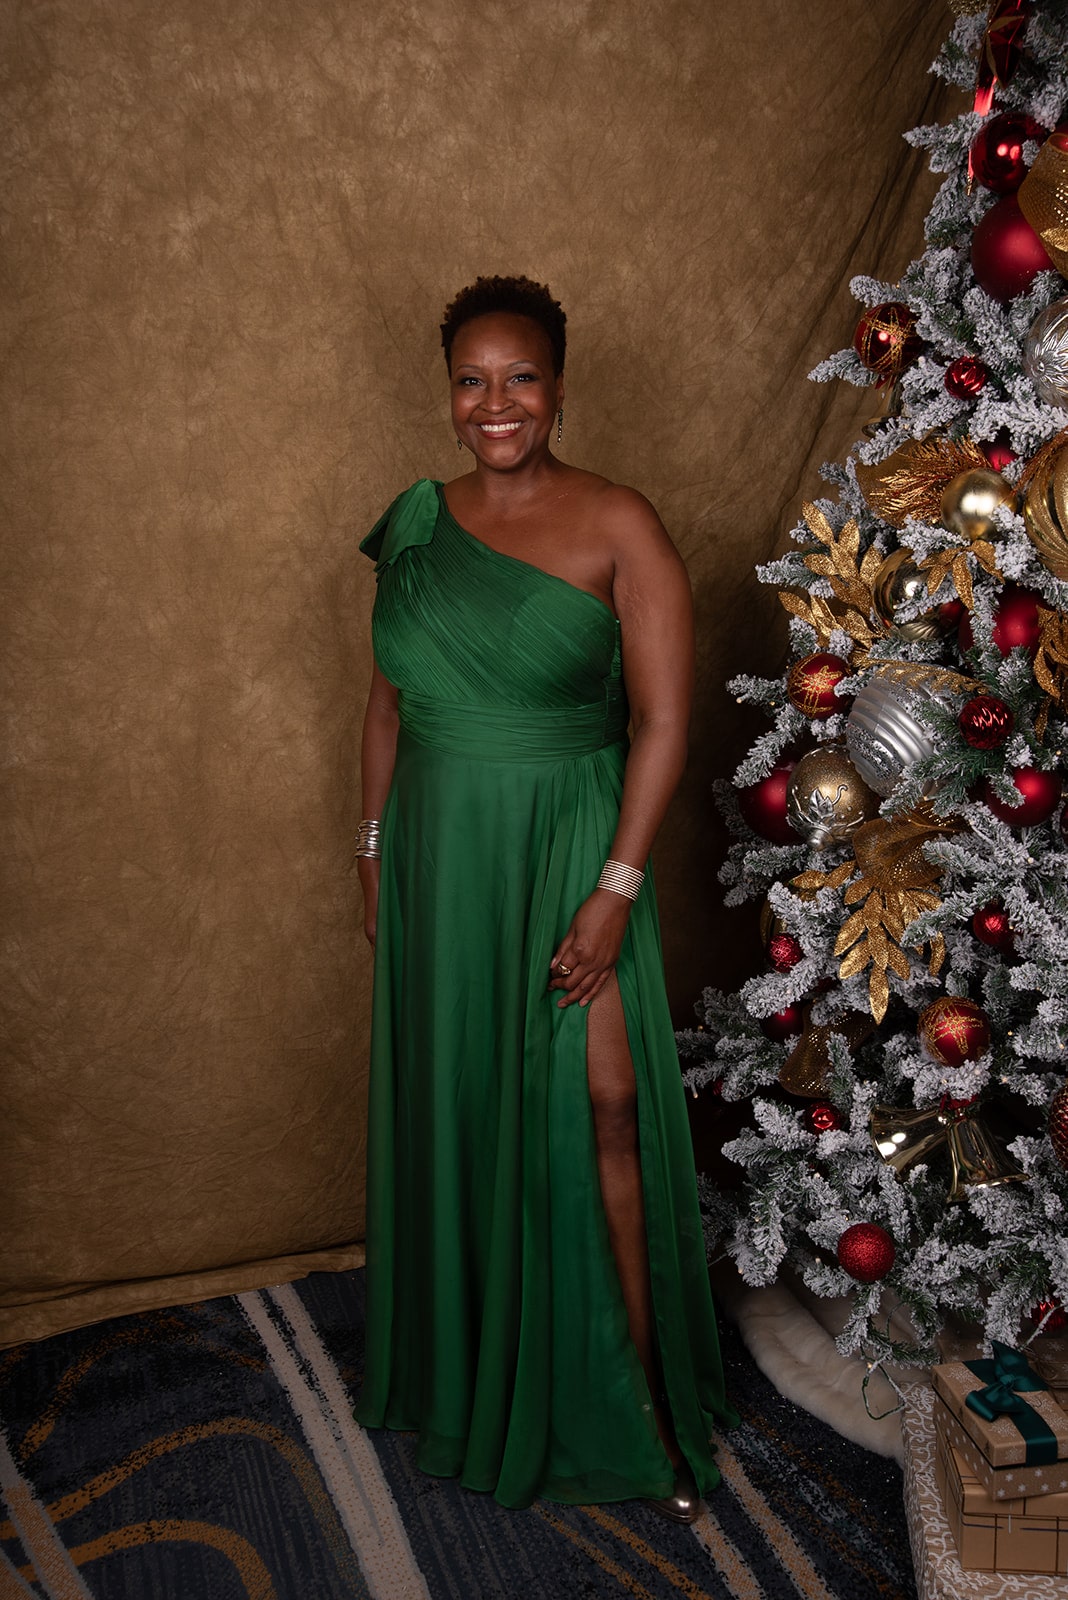 African American female wearing an emerald green gown